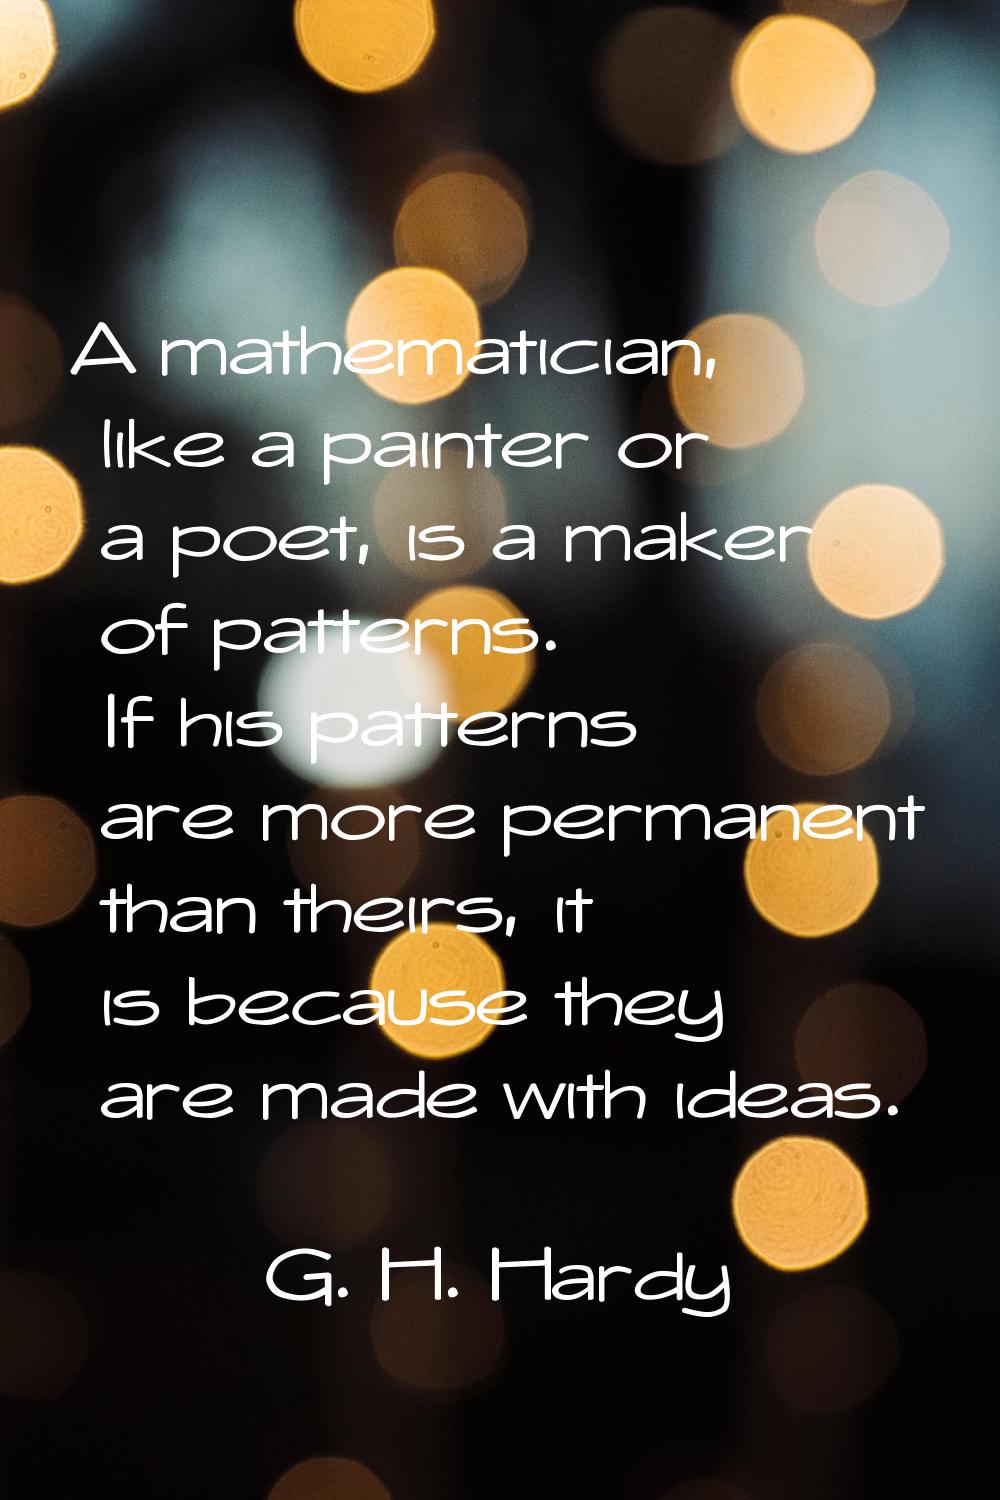 A mathematician, like a painter or a poet, is a maker of patterns. If his patterns are more permane